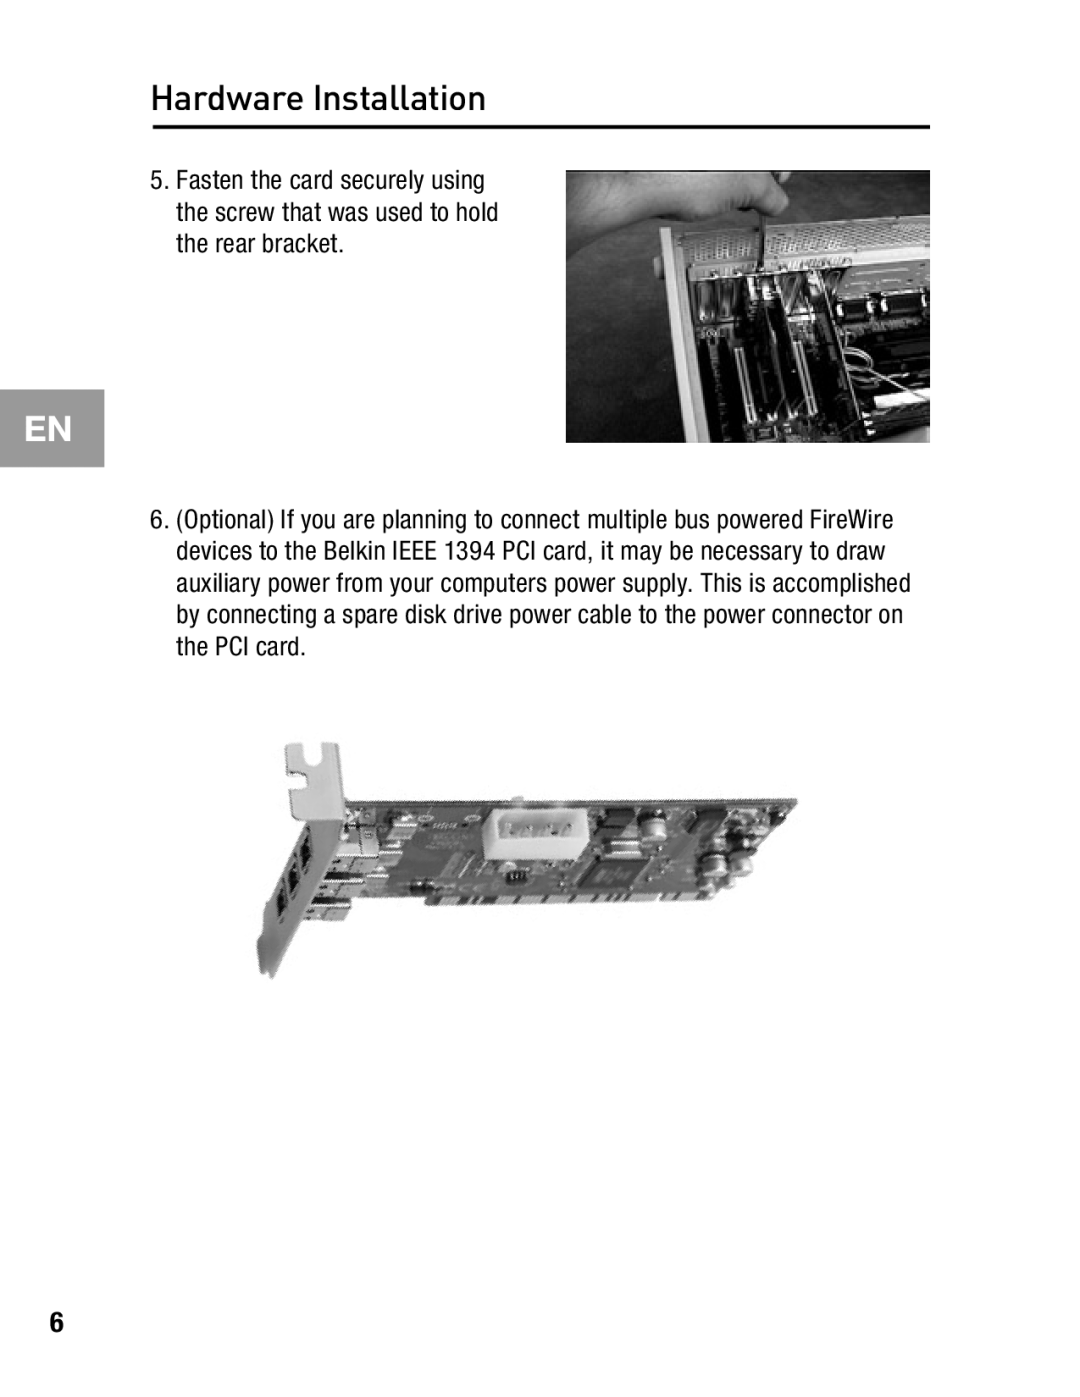 Belkin F5U503 Hardware Installation, Fasten the card securely using the screw that was used to hold the rear bracket 